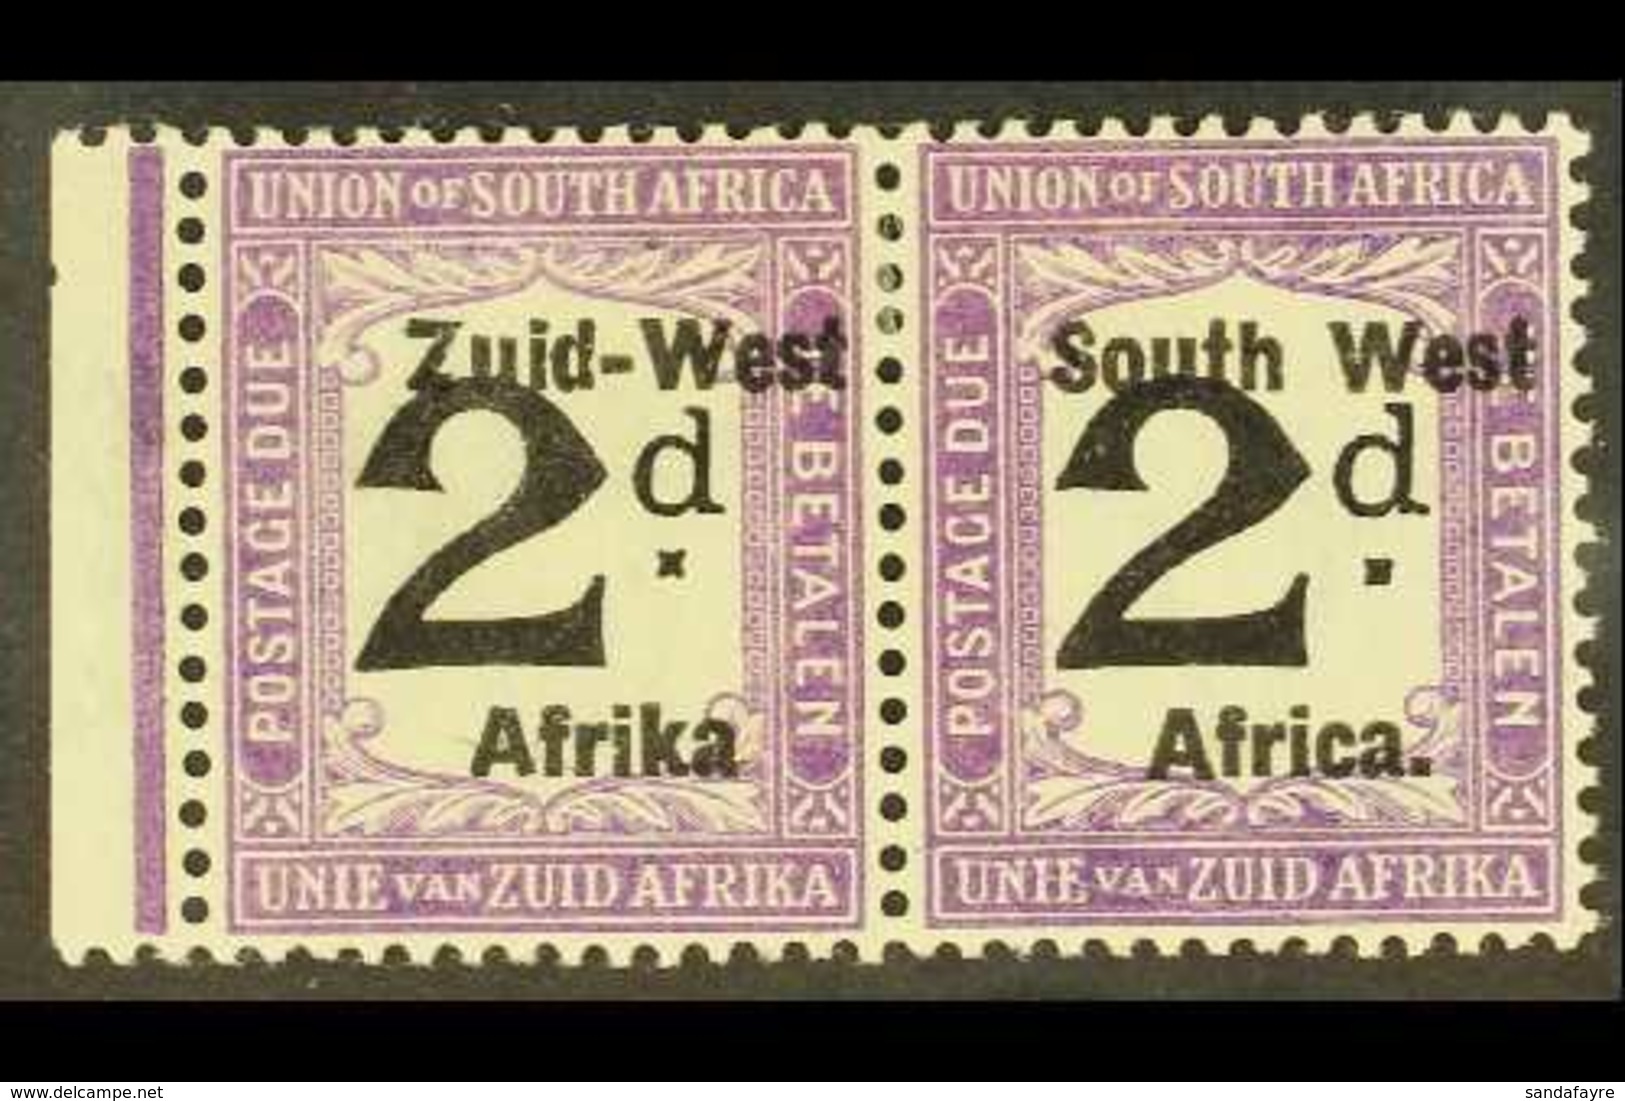 POSTAGE DUES 1923 2d Black & Violet Overprint Setting II 10mm Between Lines Of Overprint With "AFRIKA" WITHOUT STOP Vari - South West Africa (1923-1990)